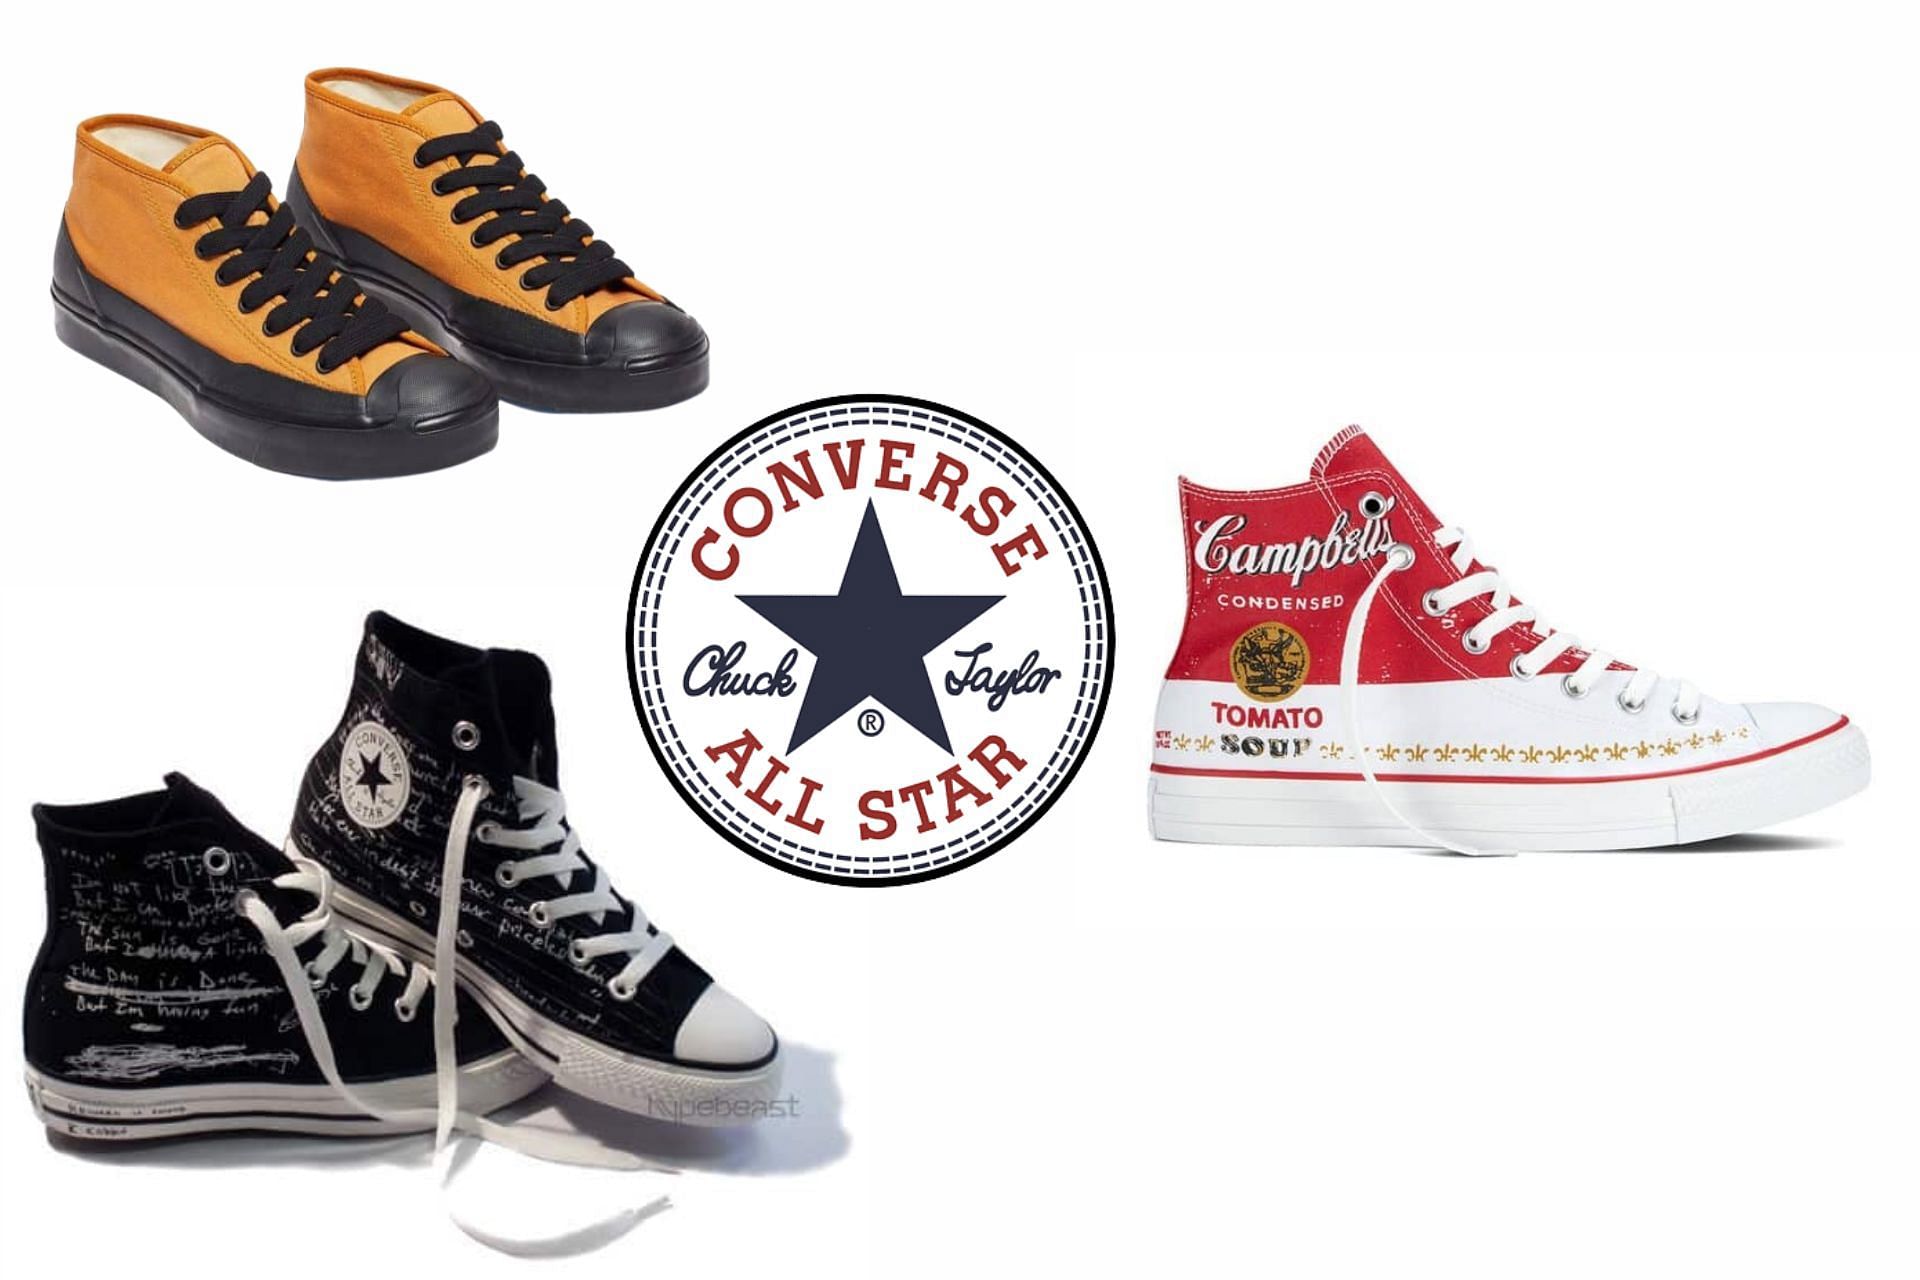 Real Converse vs Fake  Converse shoes outfit, Converse, Black converse  outfits